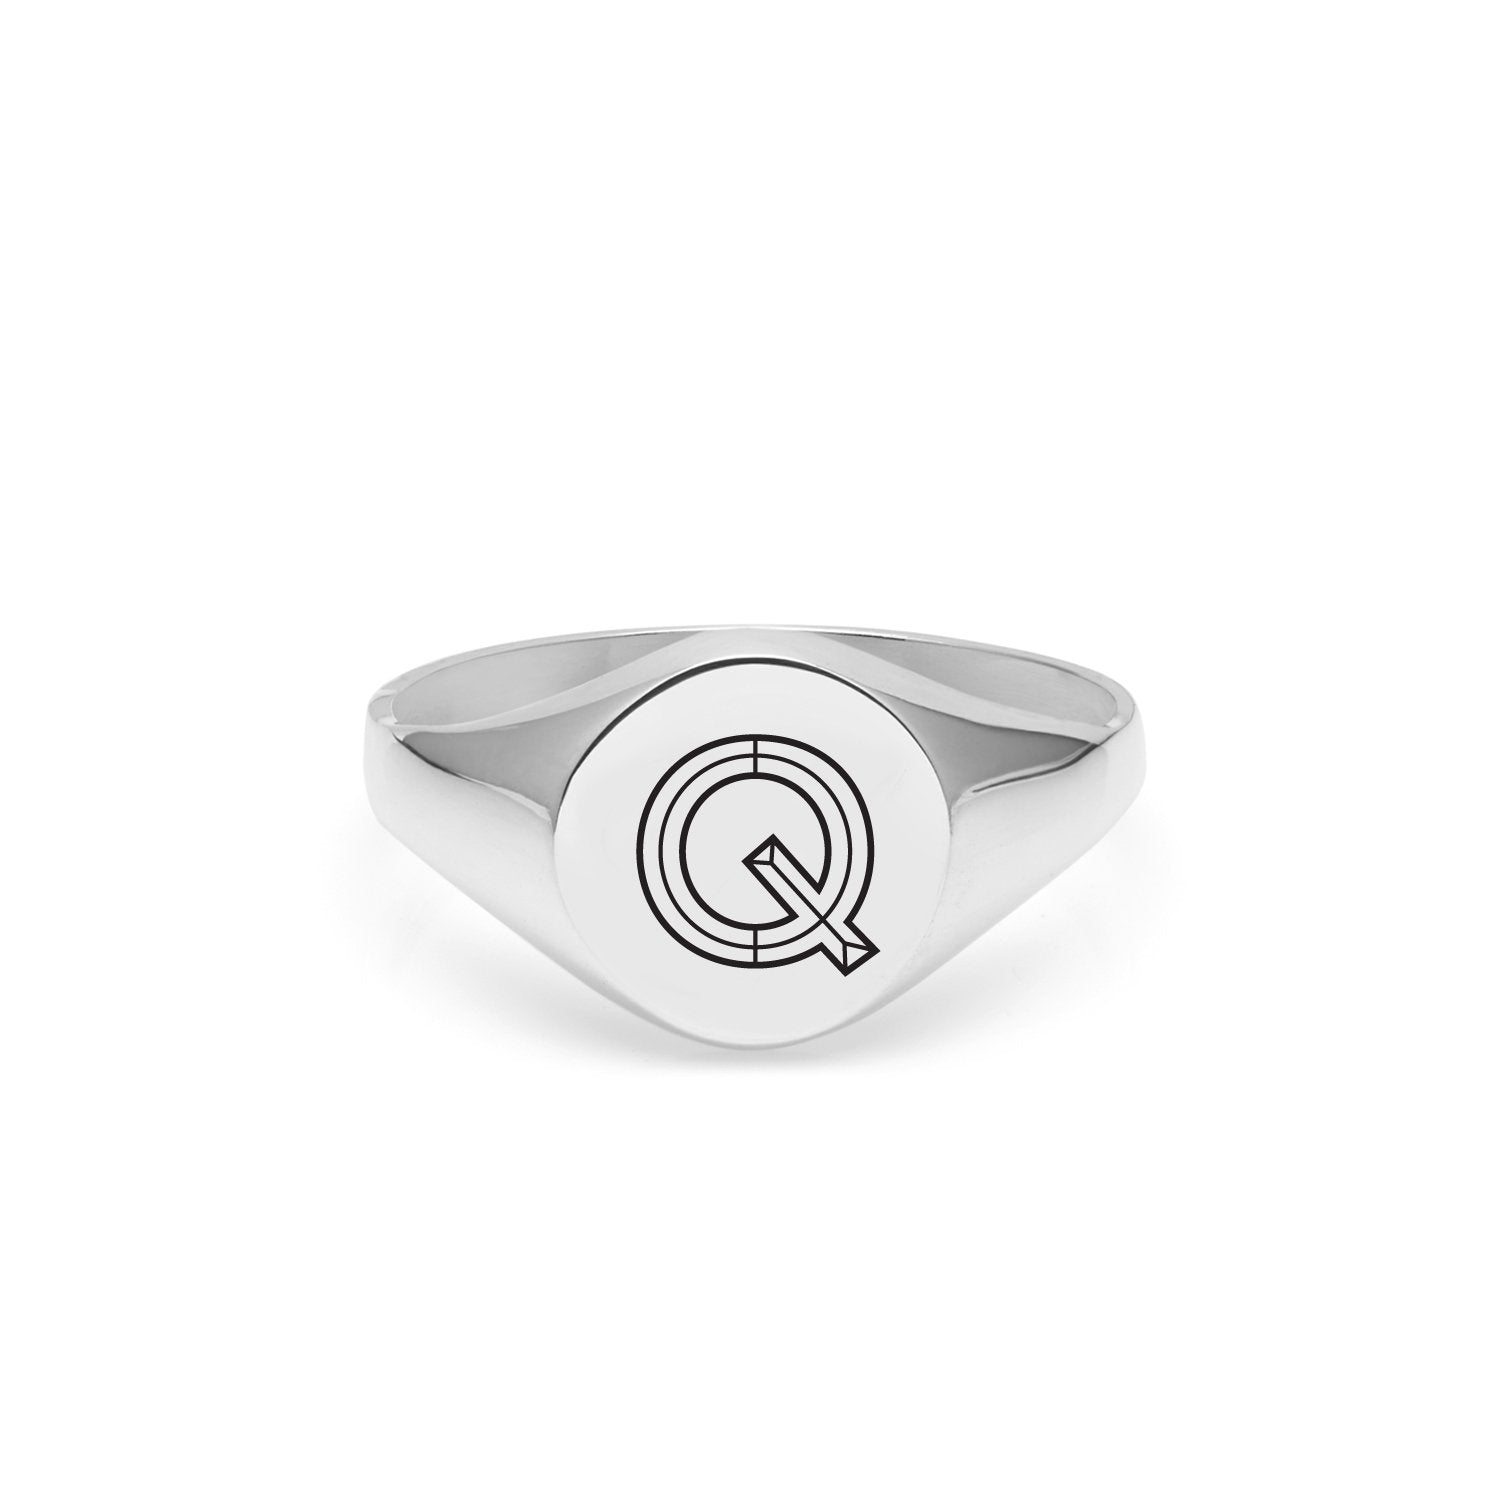 Facett Initial Q Round Signet Ring - Silver - Myia Bonner Jewellery